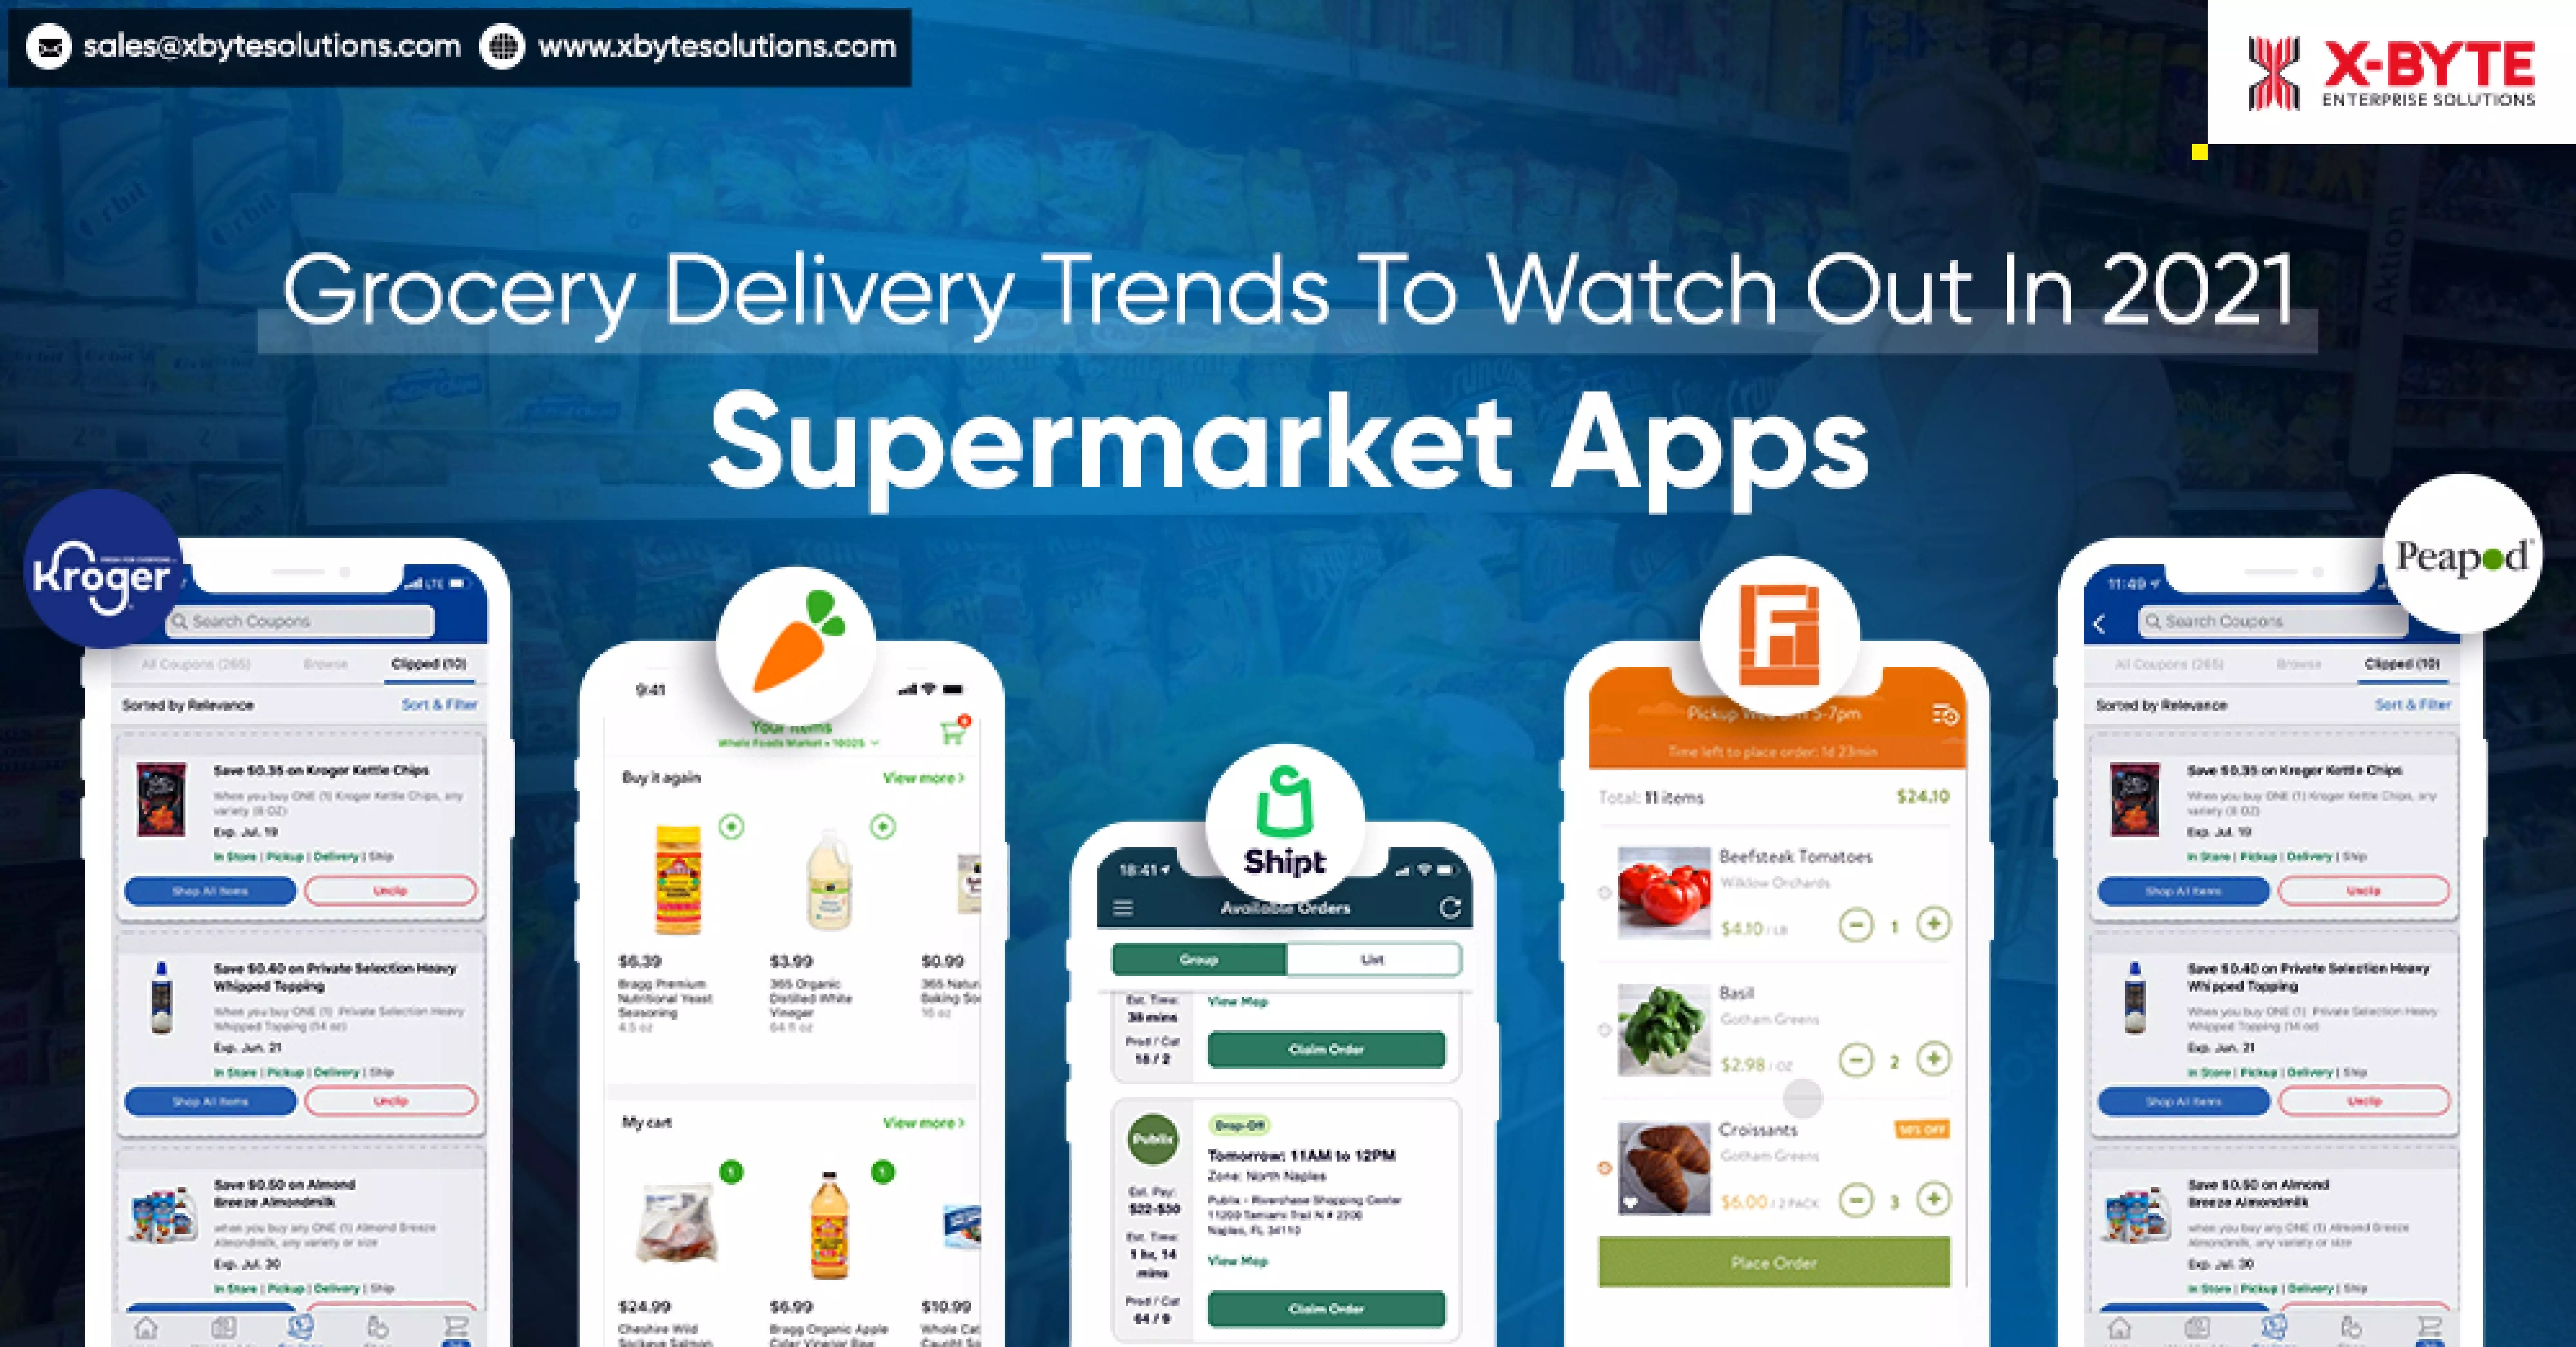 Grocery Delivery Trends To Watch Out In 2021 Supermarket Apps_n